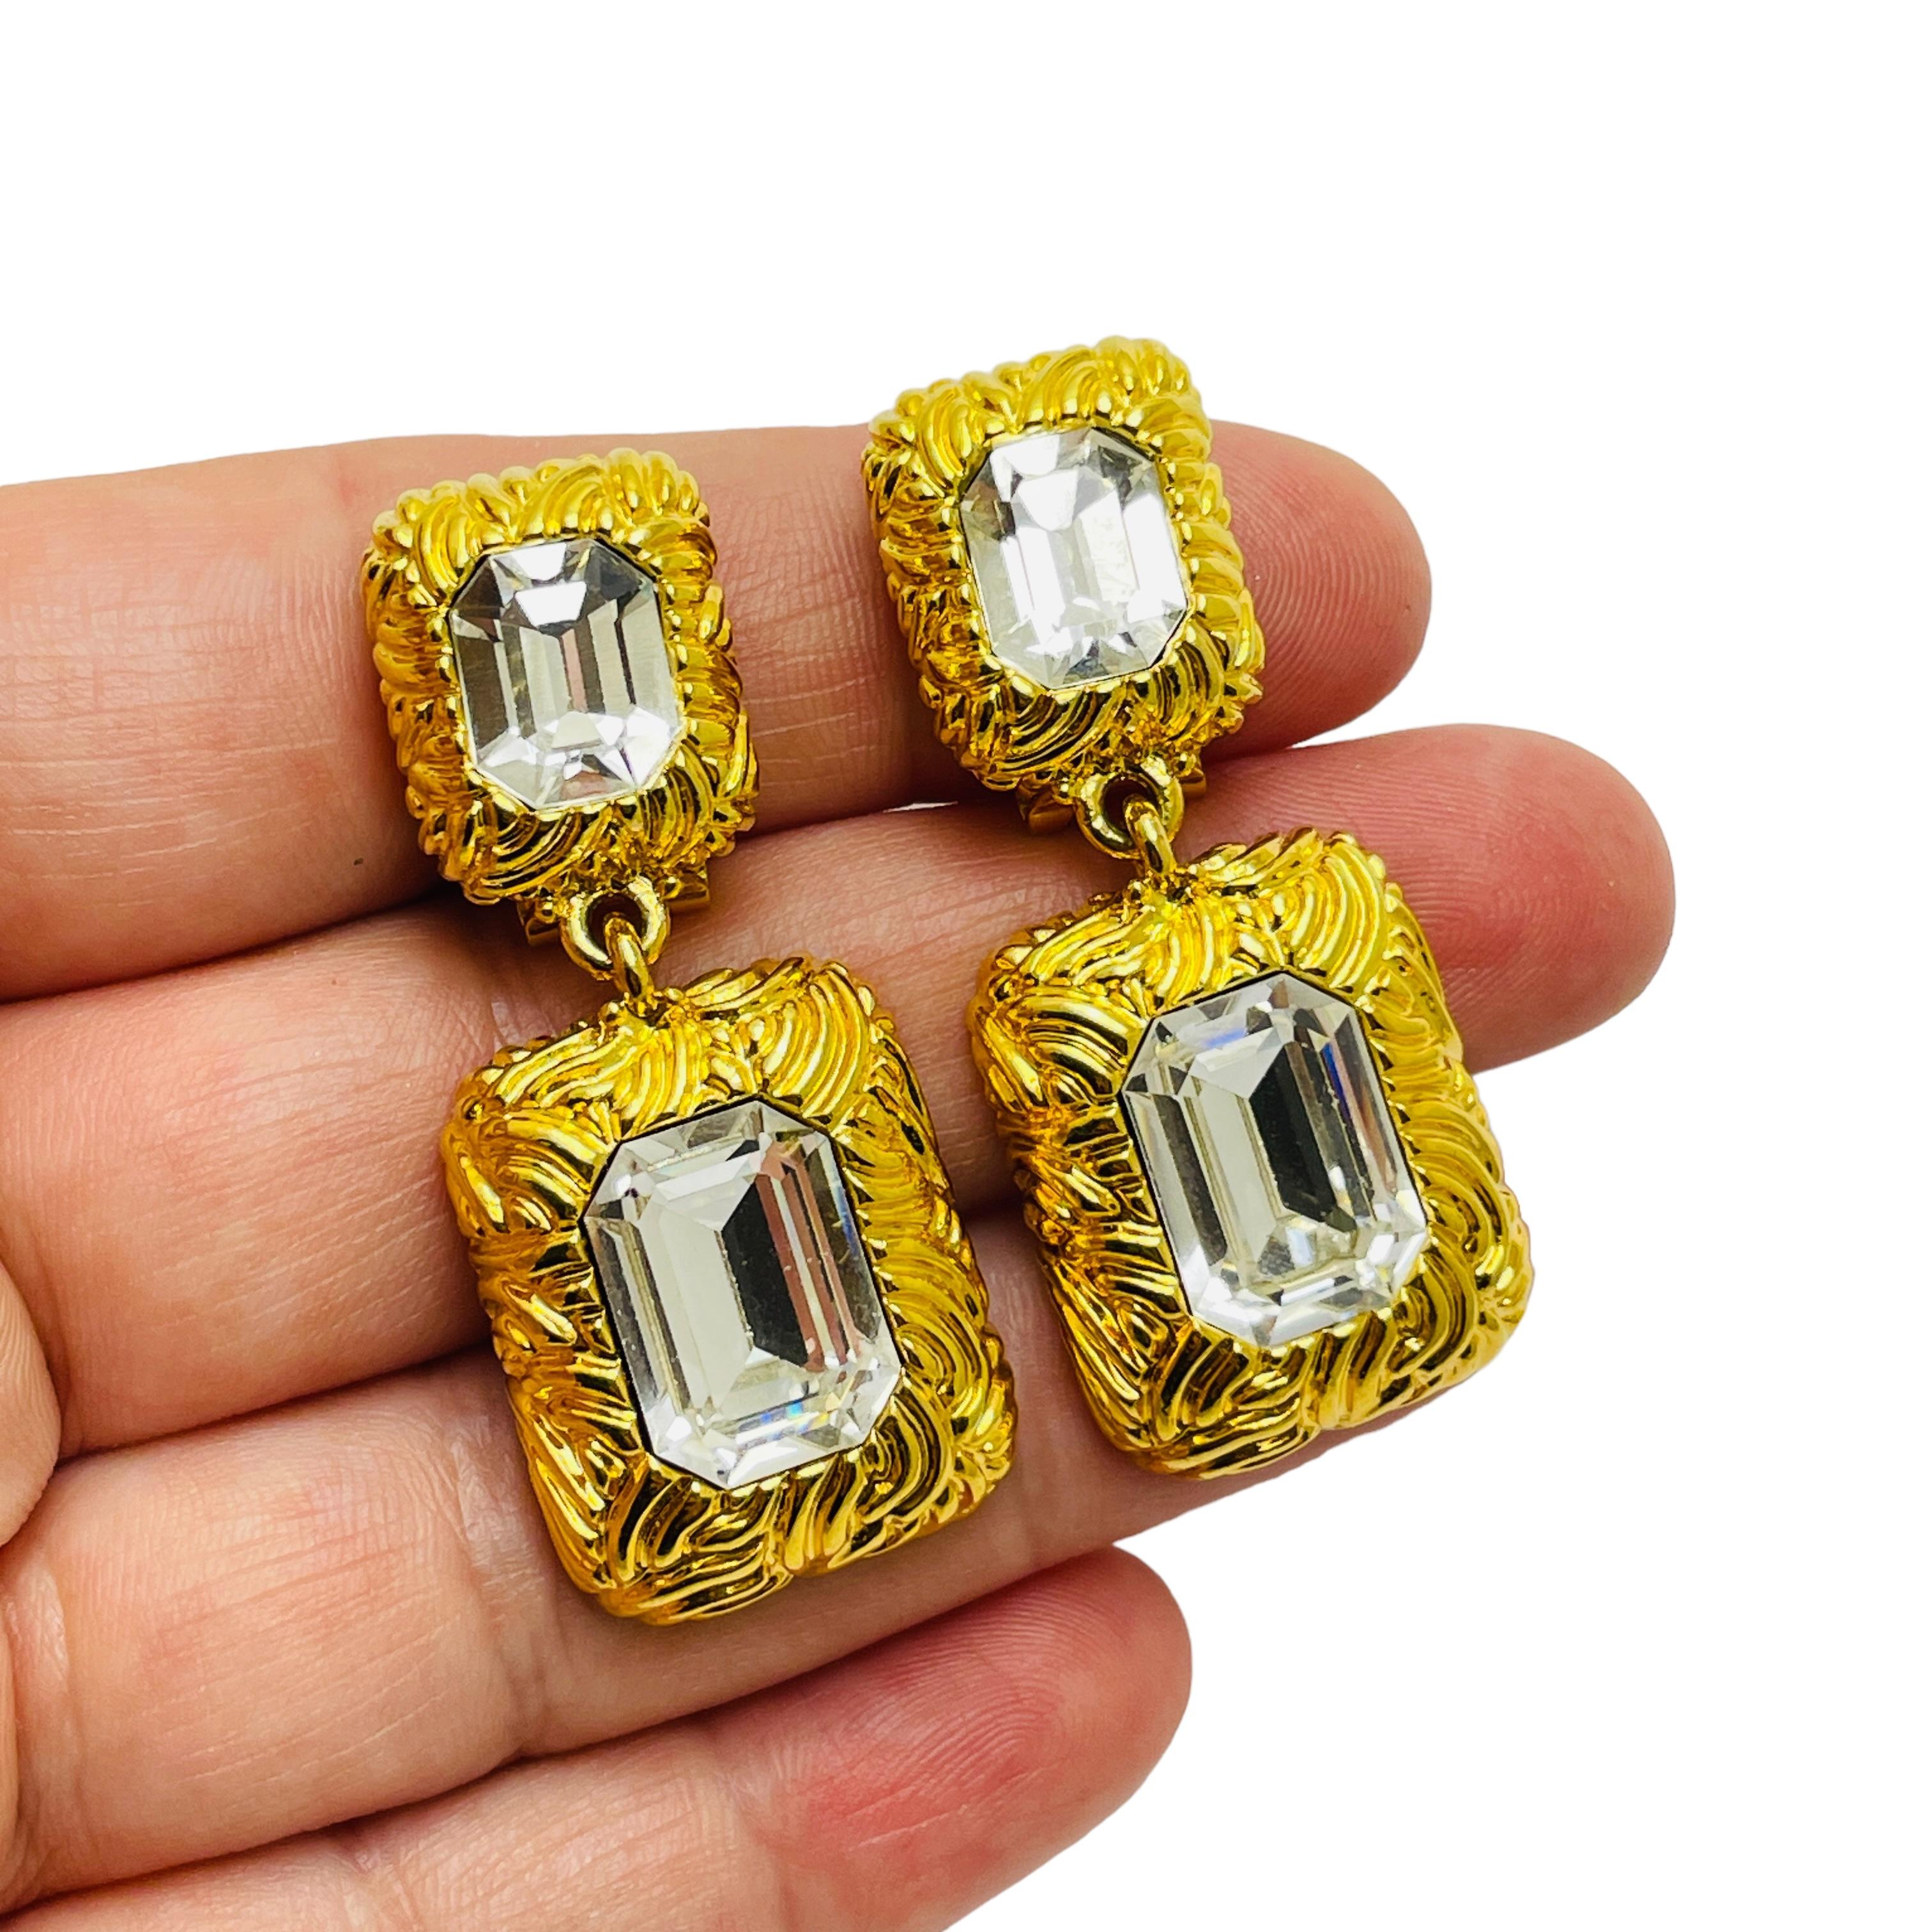 DETAILS

• signed LCI LIZ CLAIBORNE

• gold tone with glass

• vintage designer runway earrings

MEASUREMENTS

• 

CONDITION

• excellent vintage condition with minimal signs of wear

❤️❤️ VINTAGE DESIGNER JEWELRY ❤️❤️
❤️❤️ ALEXANDER'S BOUTIQUE ❤️❤️